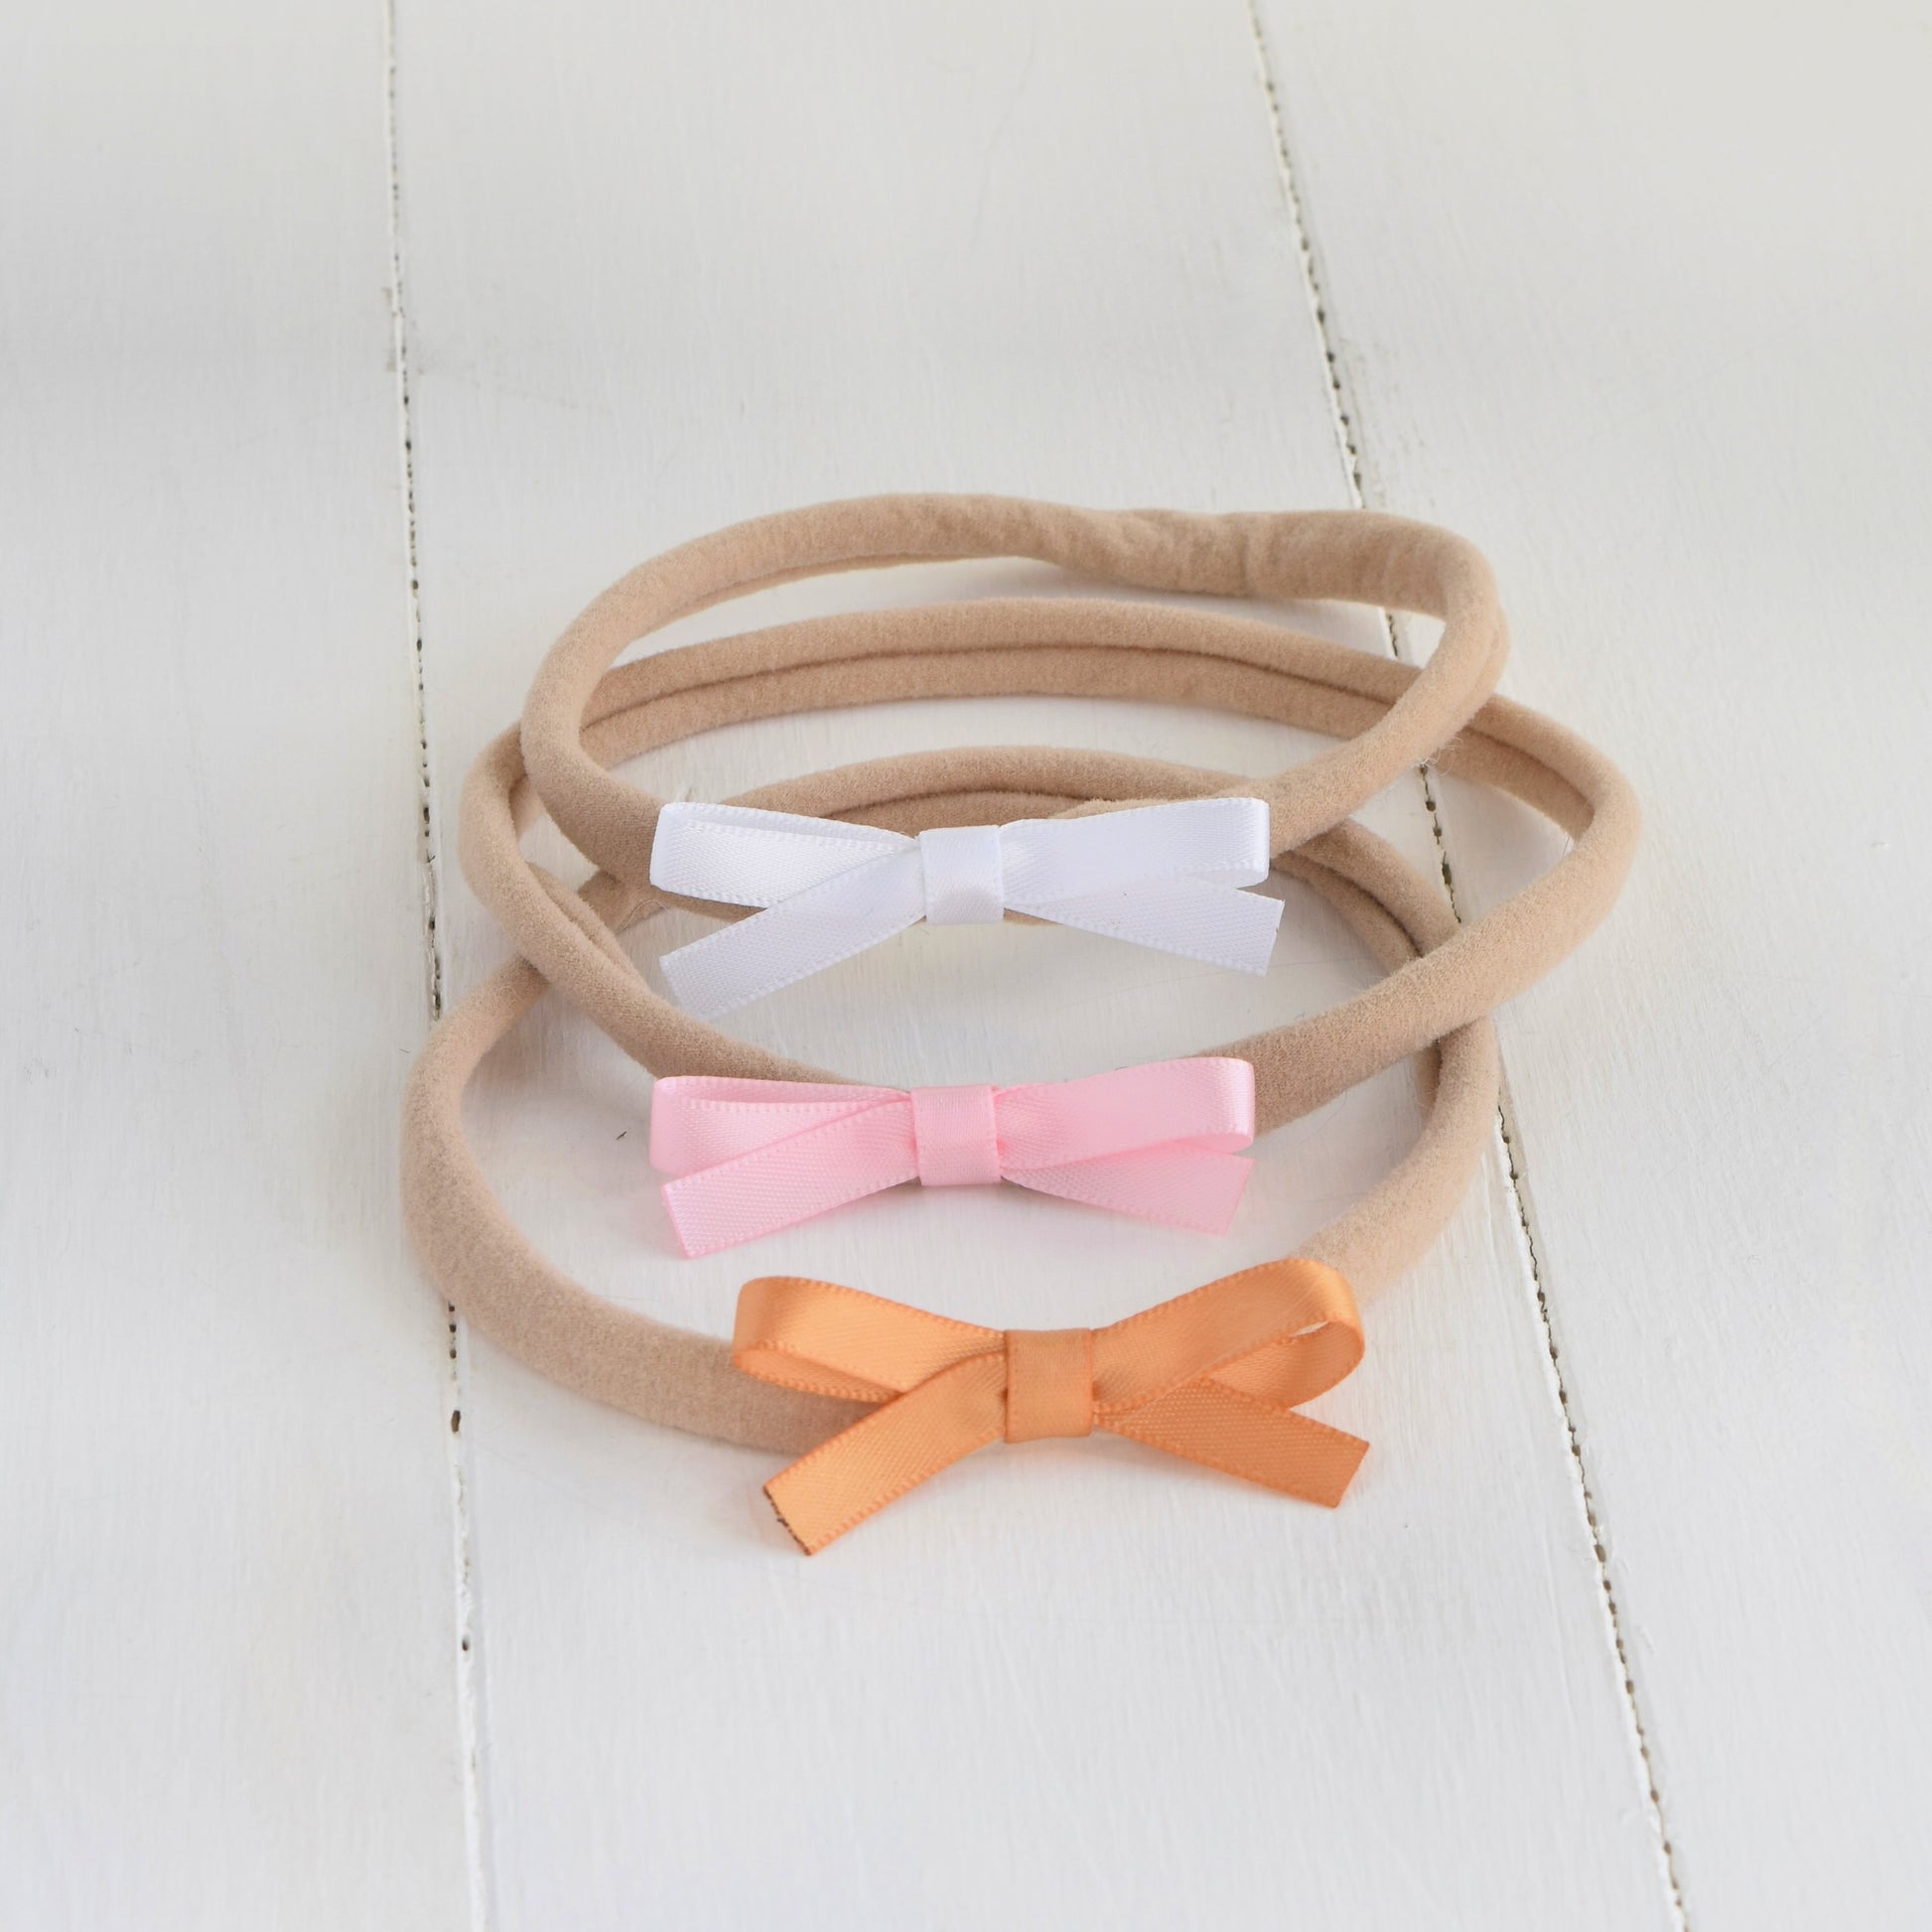 satin bow headband in white, pink and gold.